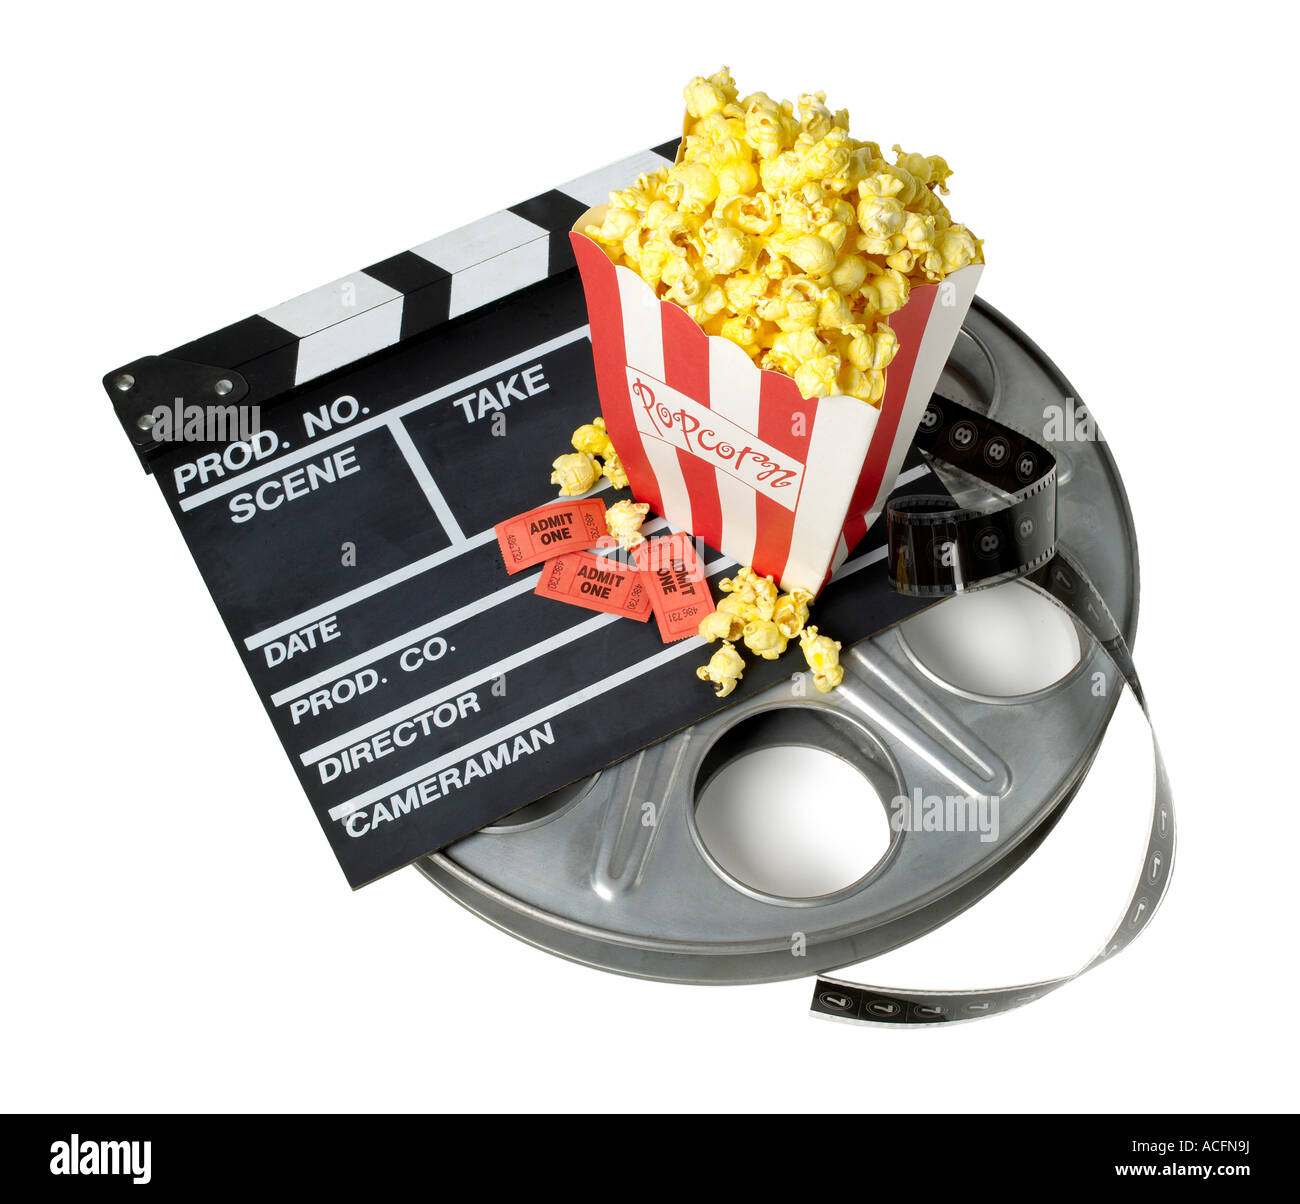 Director's Slate movie tickets film reel and popcorn elevated view Stock Photo